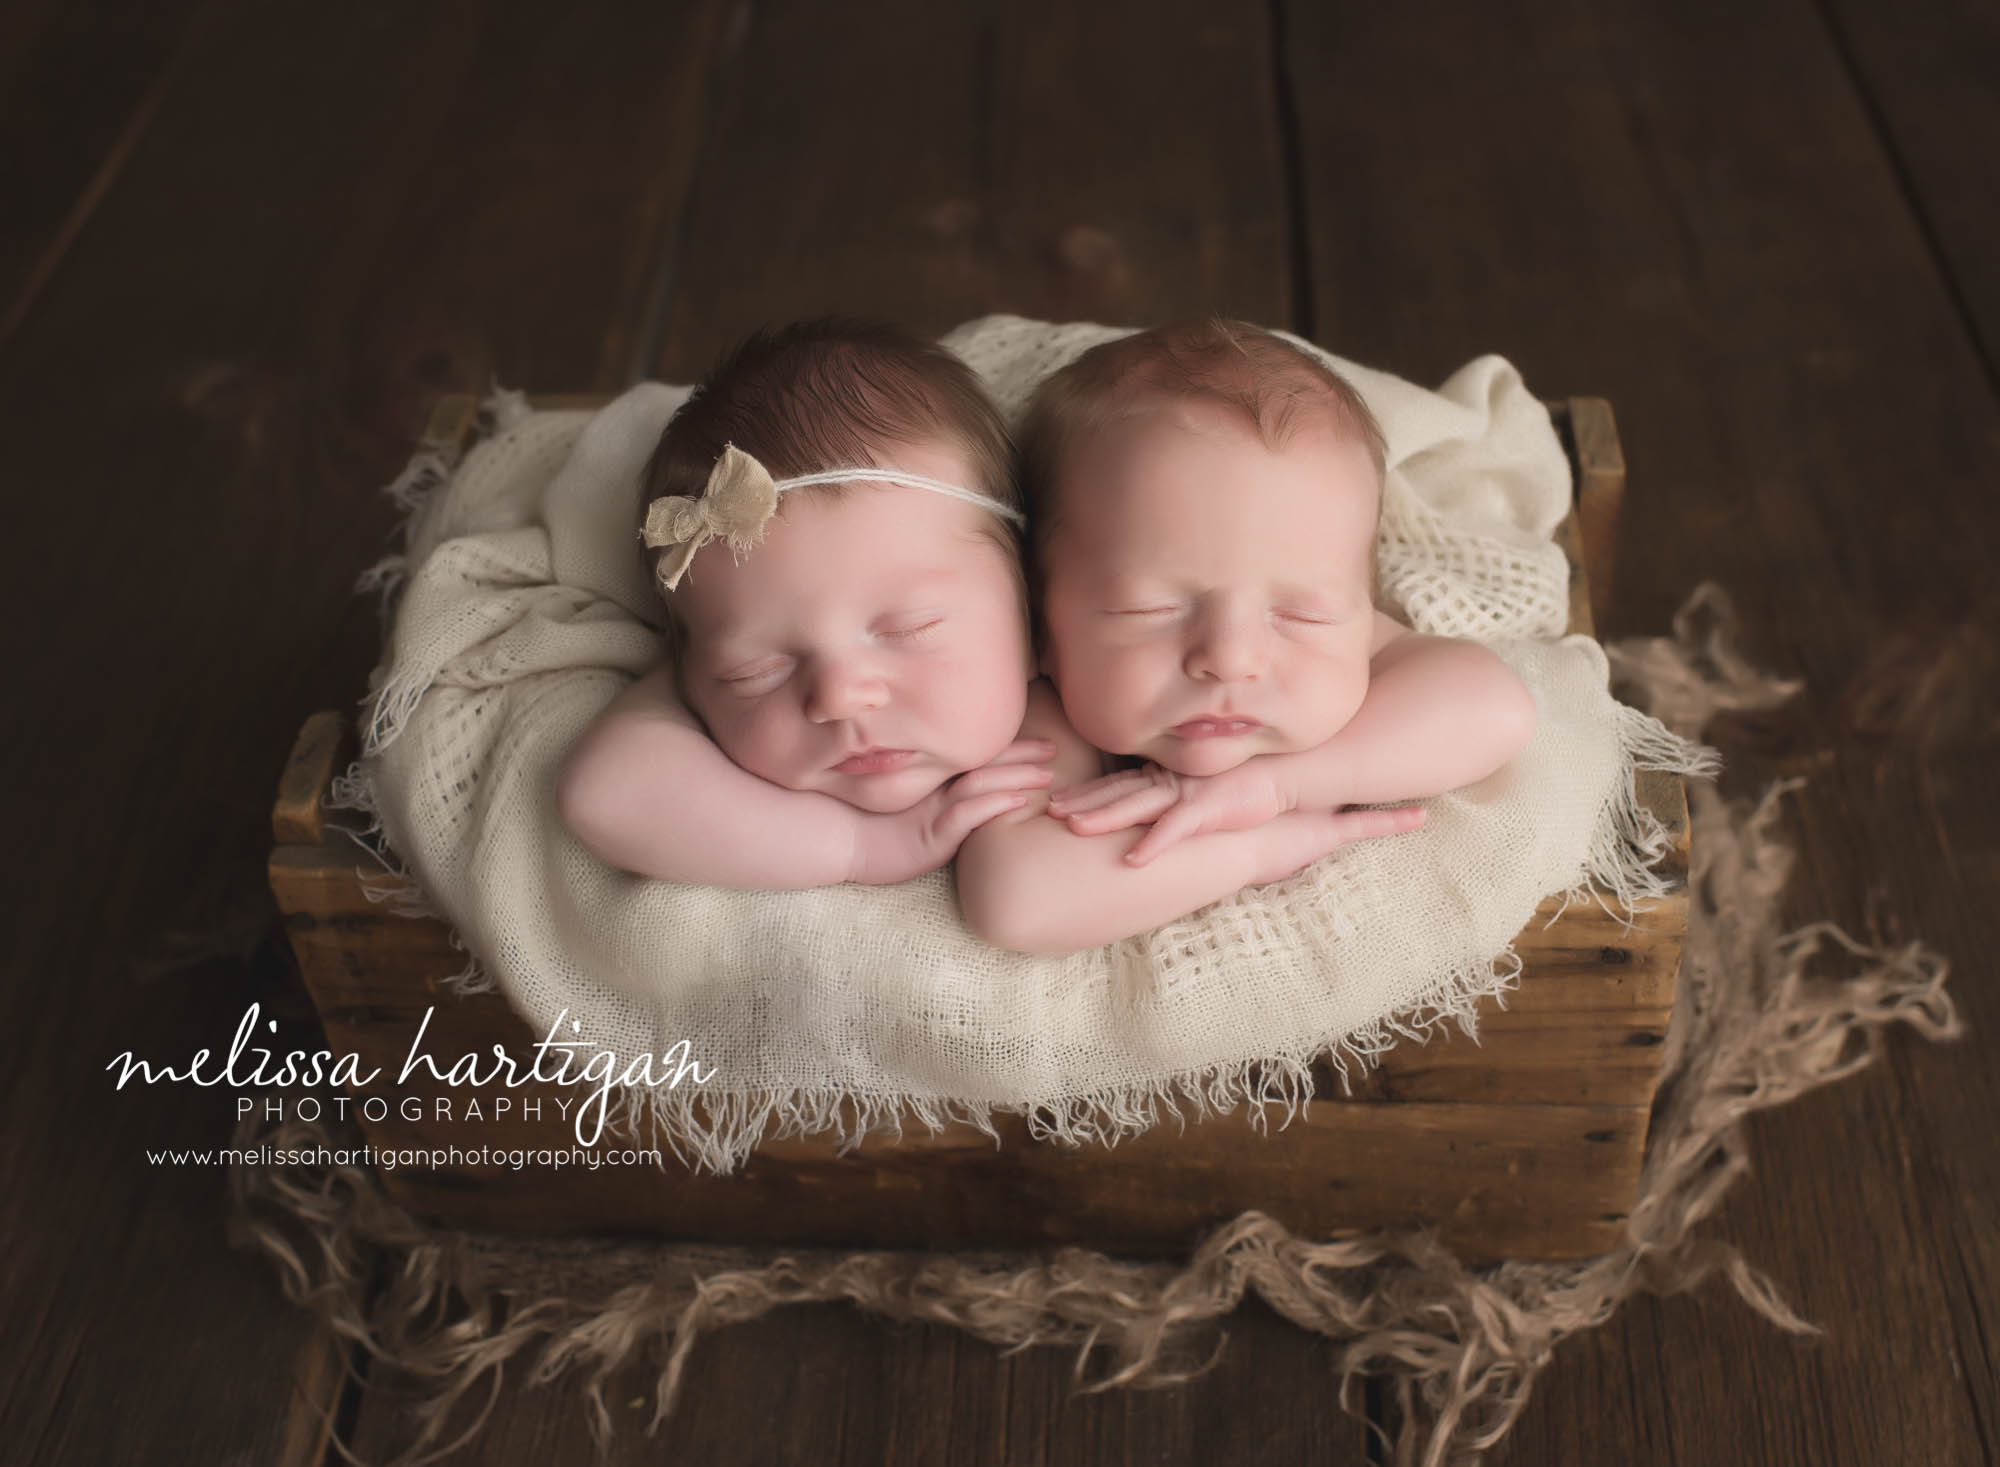 Melissa Hartigan Photography Connecticut Newborn Twin Photographer Coventry Ct Middlefield CT baby Fairfield county Newborn and maternity CT photographer Newborn twin photographer baby twins in wooden box with cream knit blanket